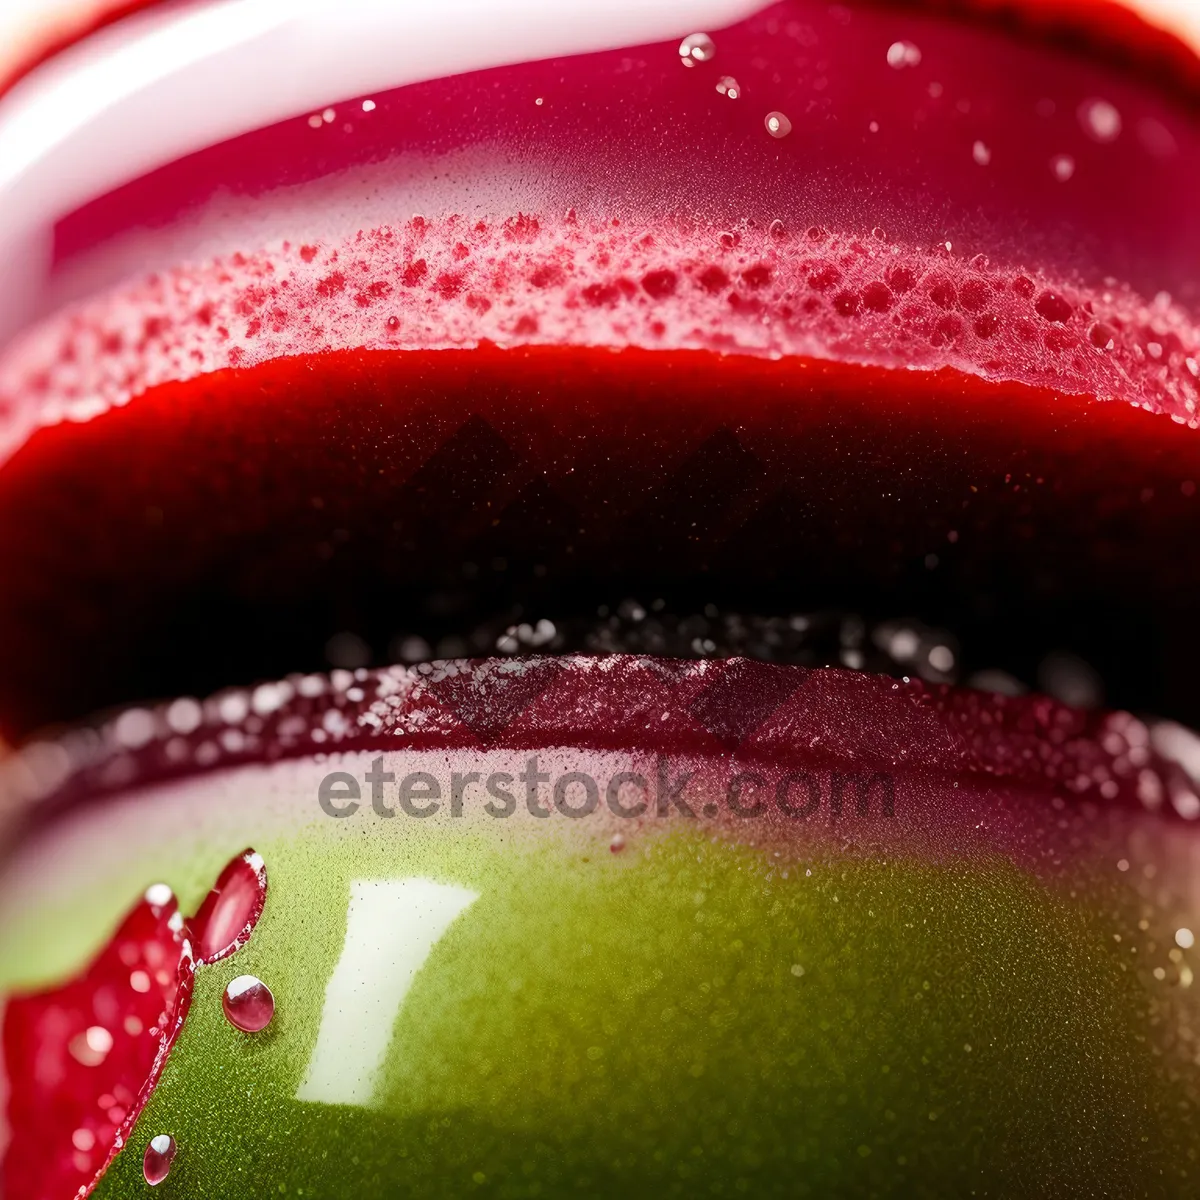 Picture of Fresh and Juicy Berry Delight: A Healthy and Tasty Fruit Snack